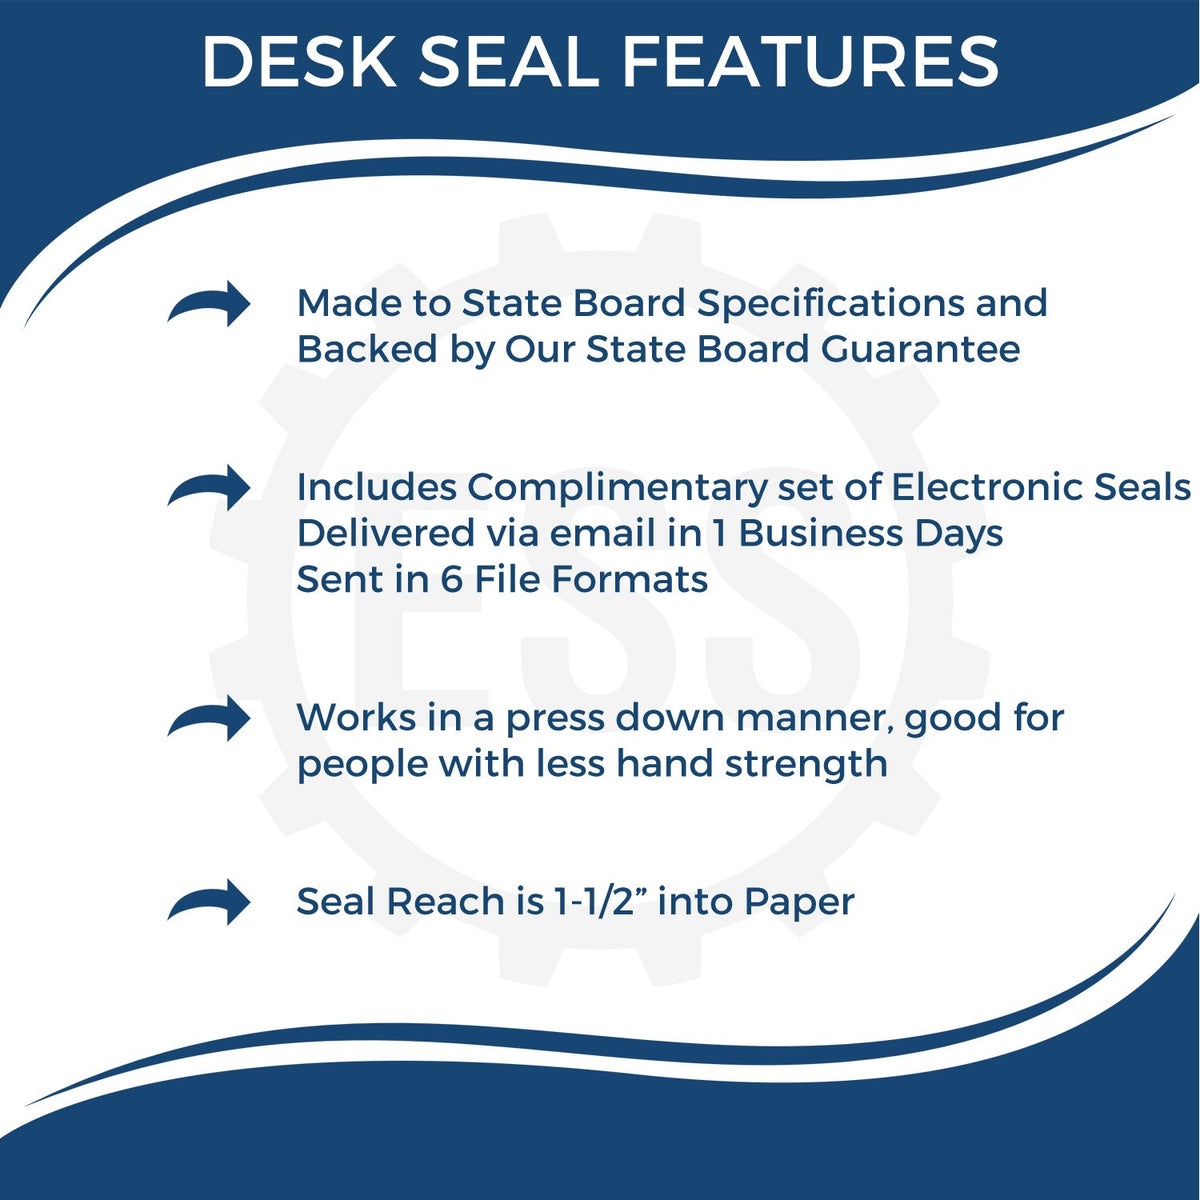 A picture of an infographic highlighting the selling points for the Wisconsin Geologist Desk Seal